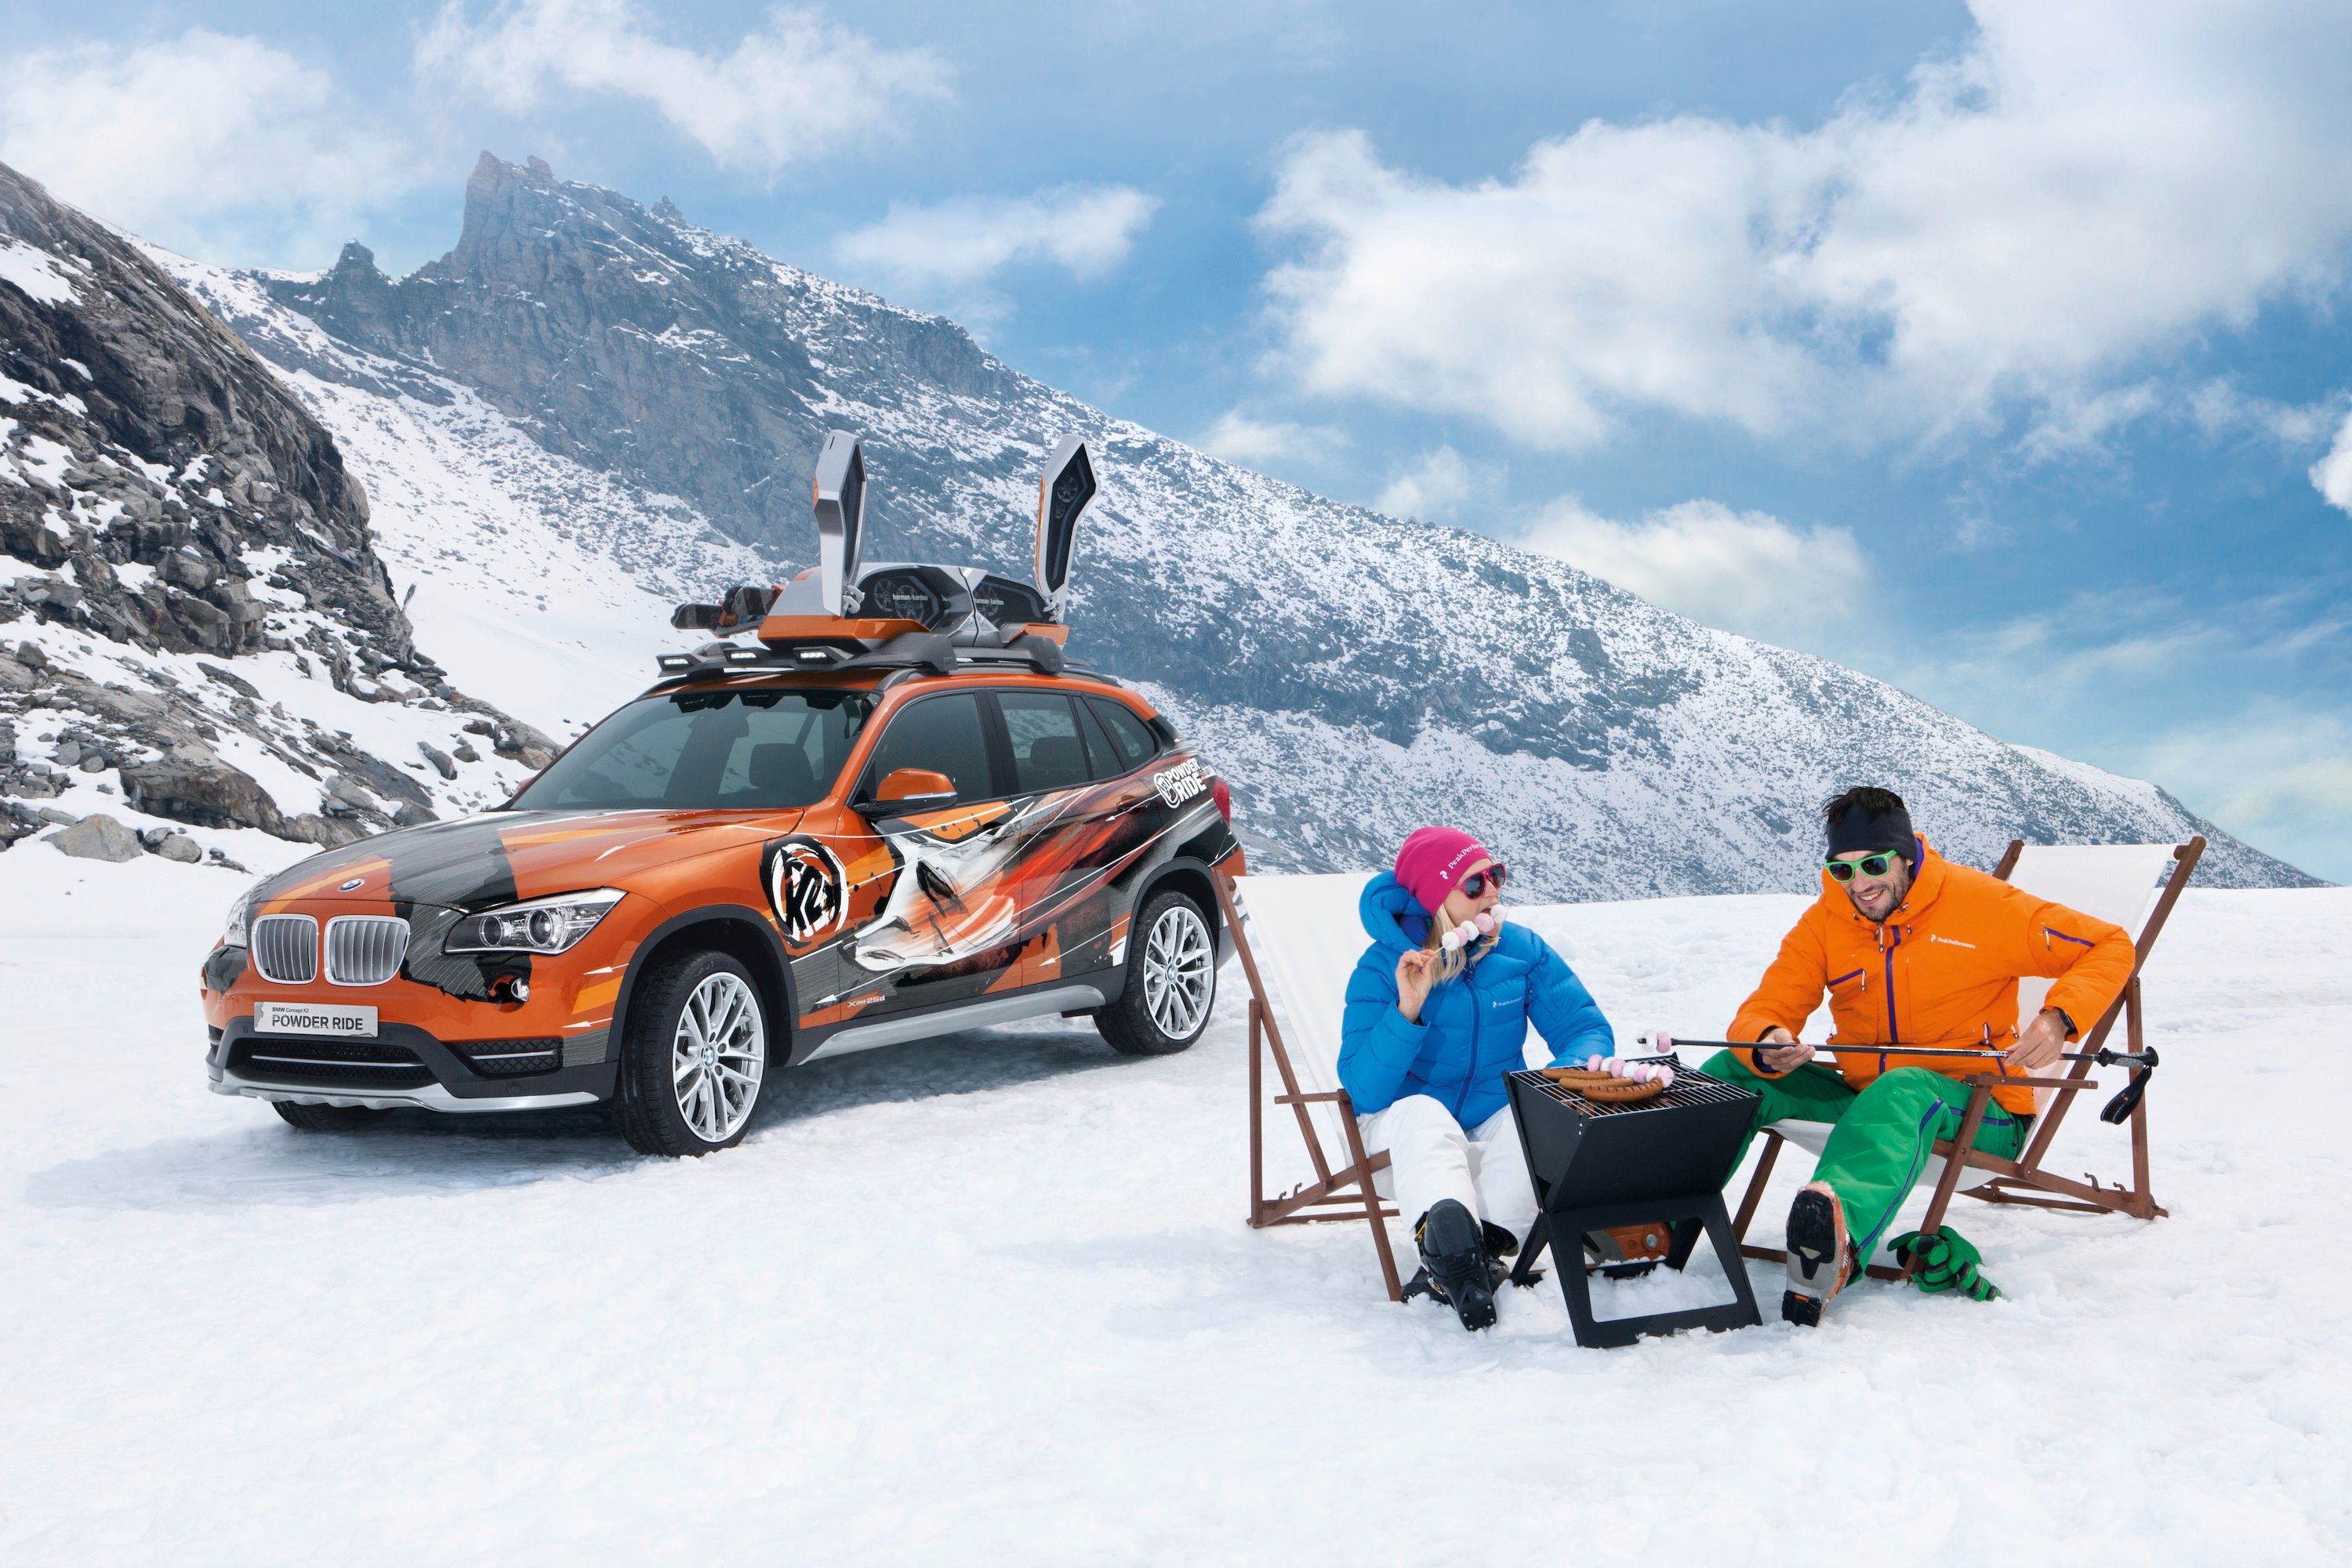 2013 BMW X1 Powder Ride and Concept K2 Special Editions